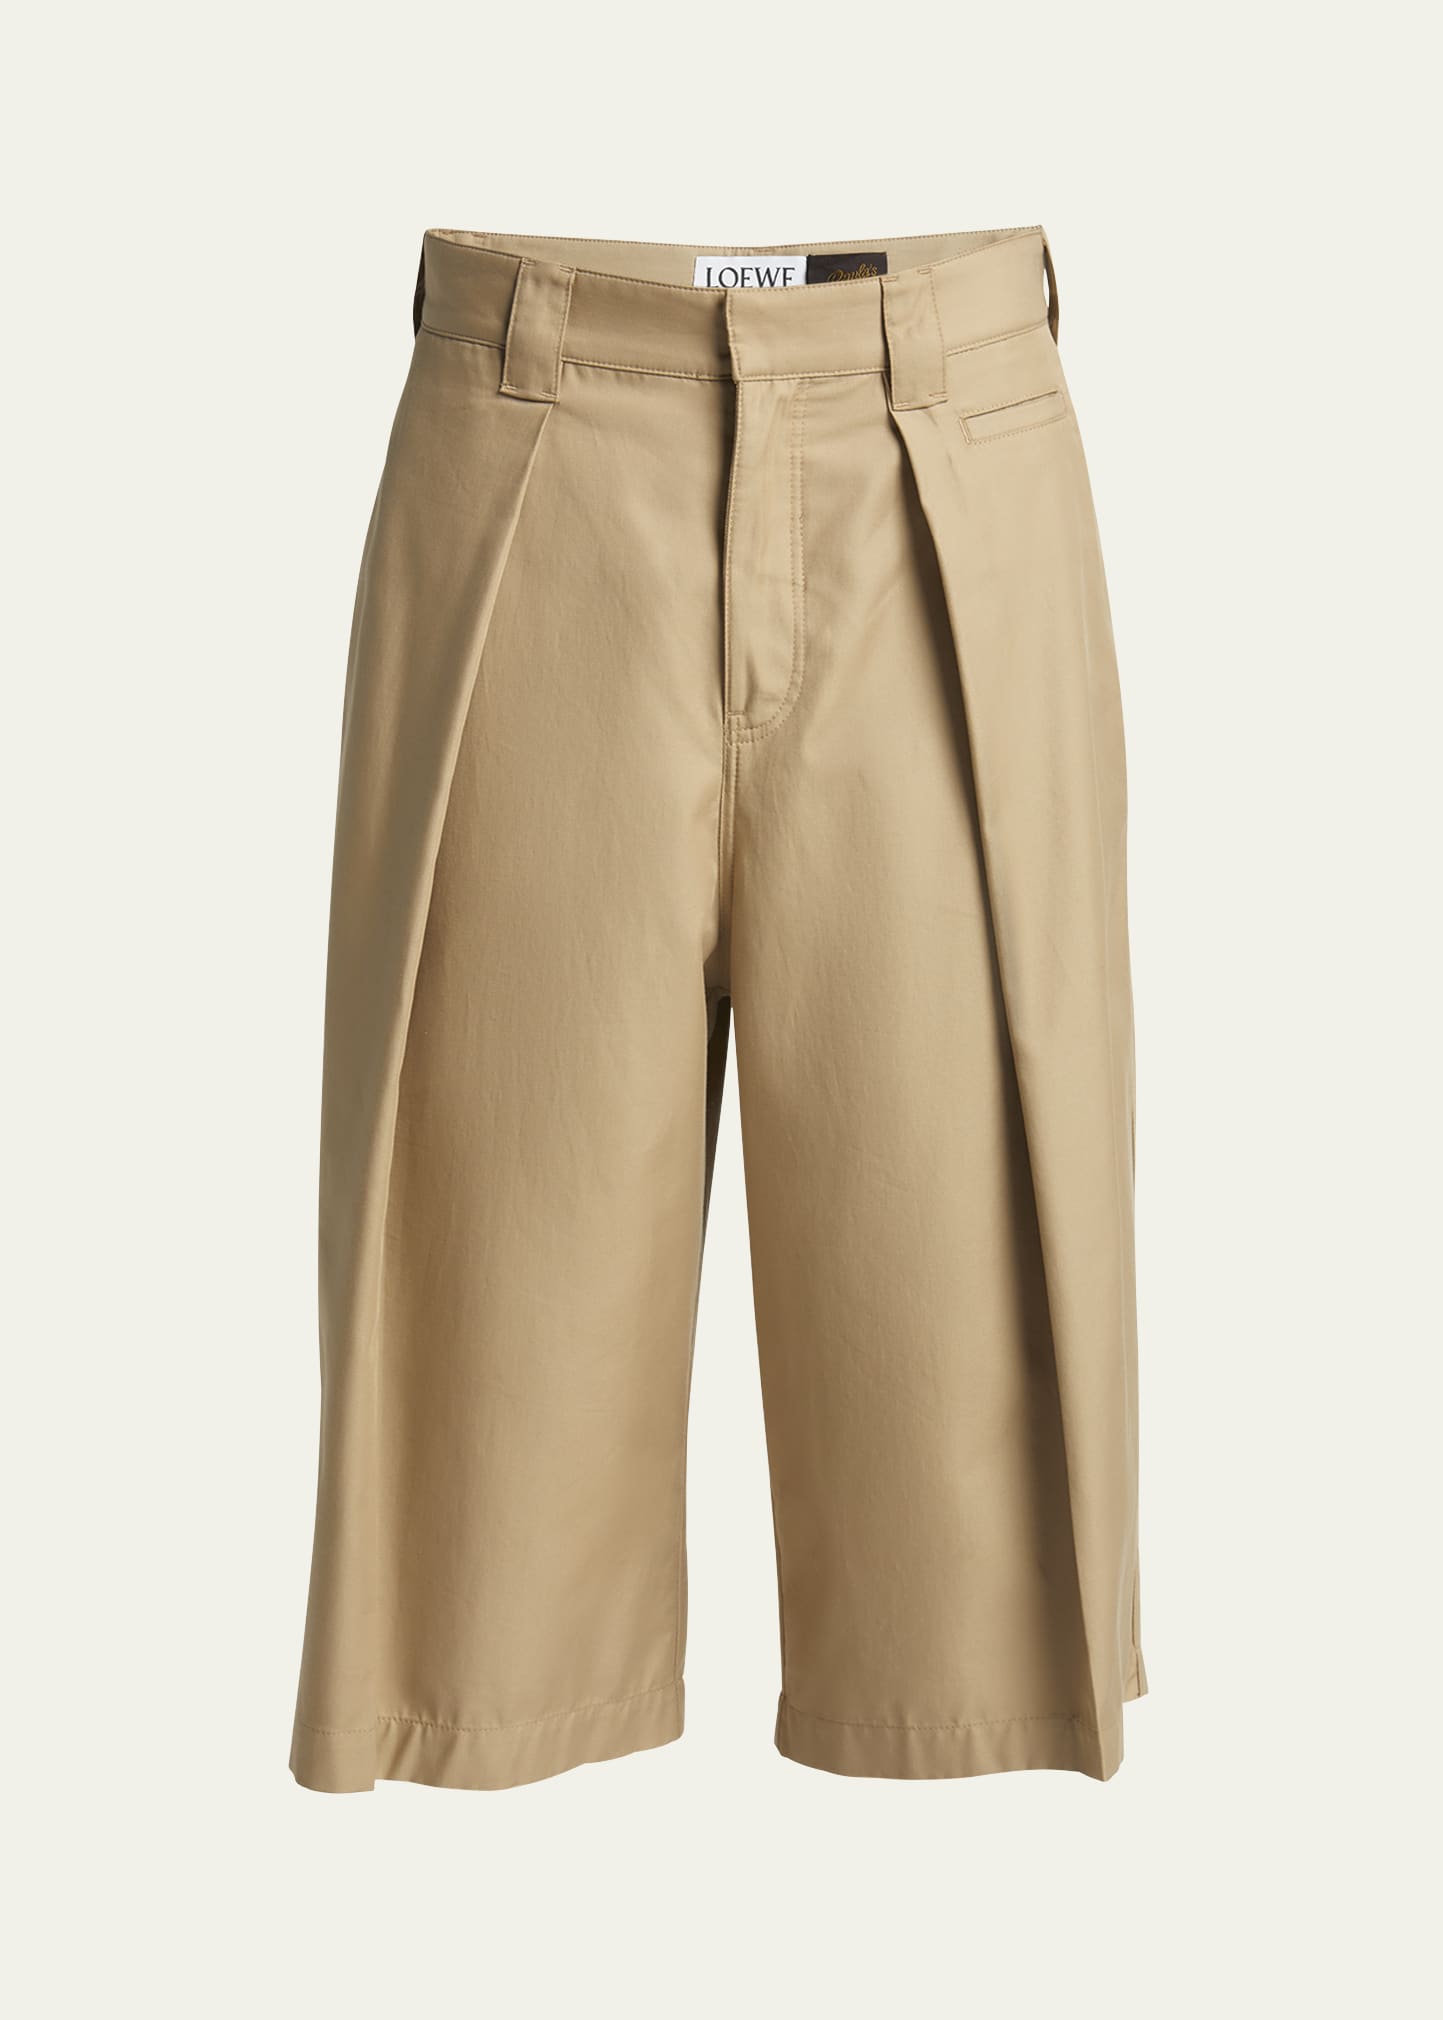 Loewe Men's Large Inverted Pleated Shorts In Taos Taupe